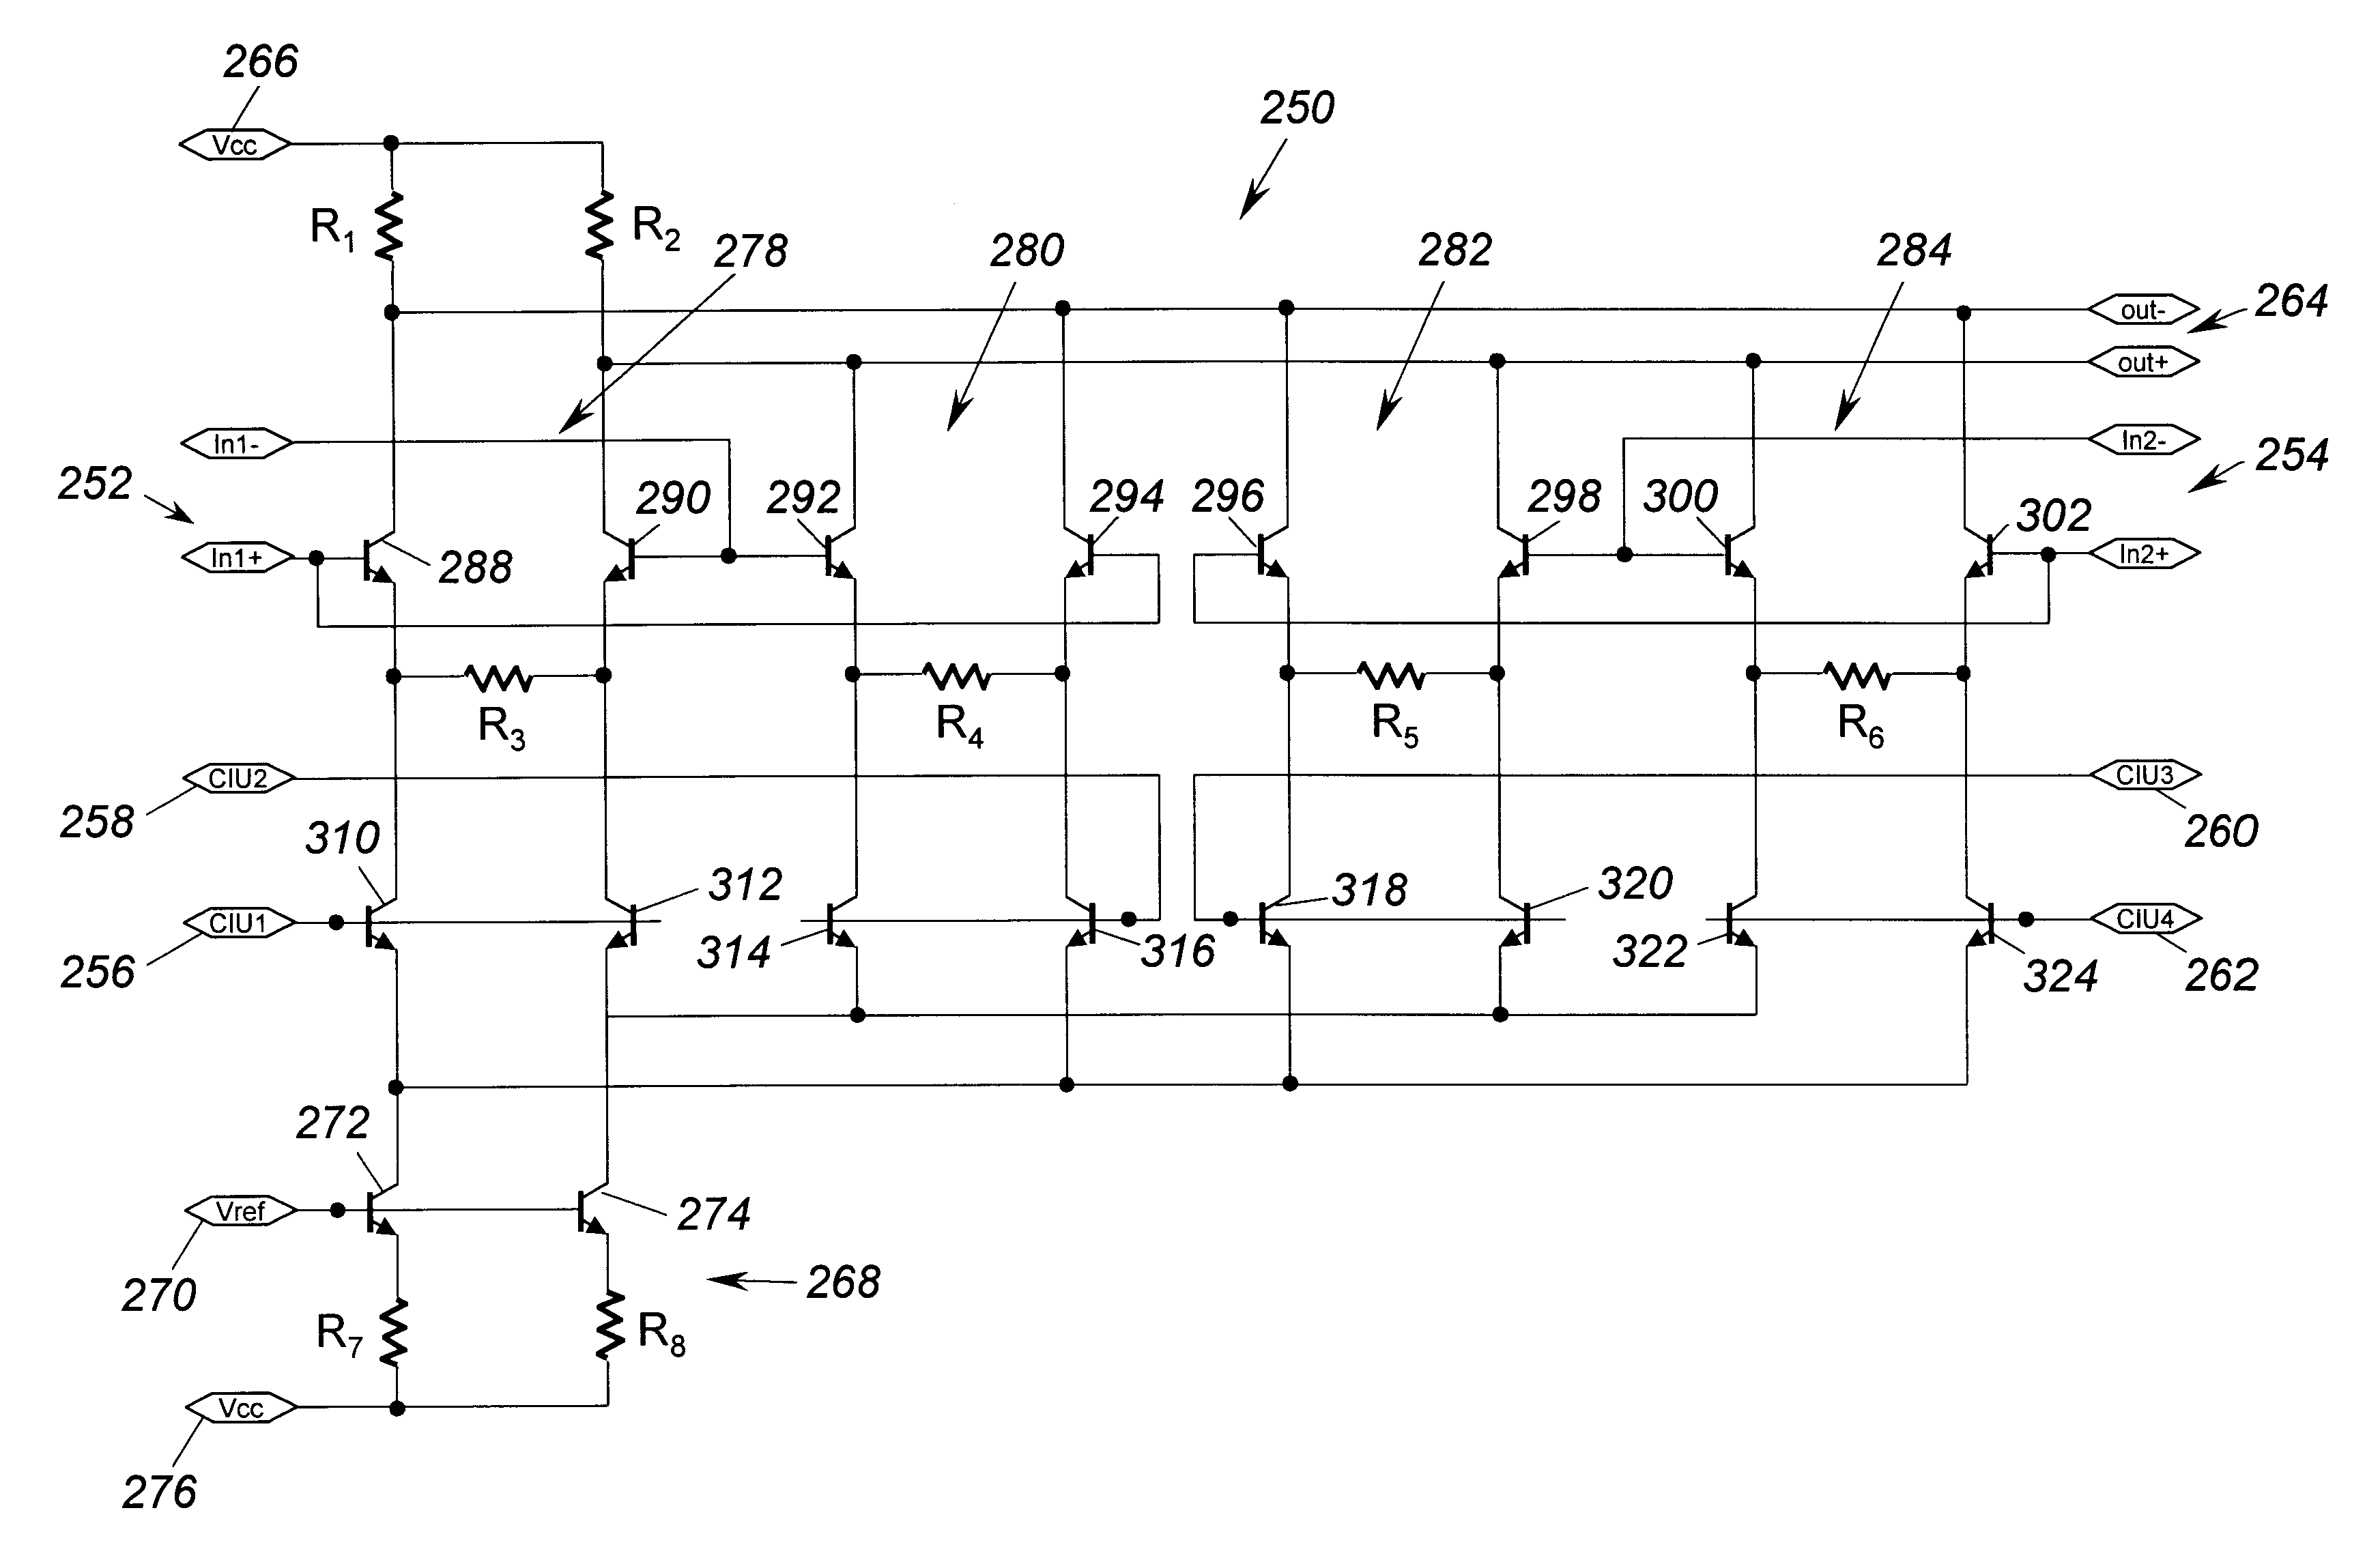 Combined multiplexer and switched gain circuit